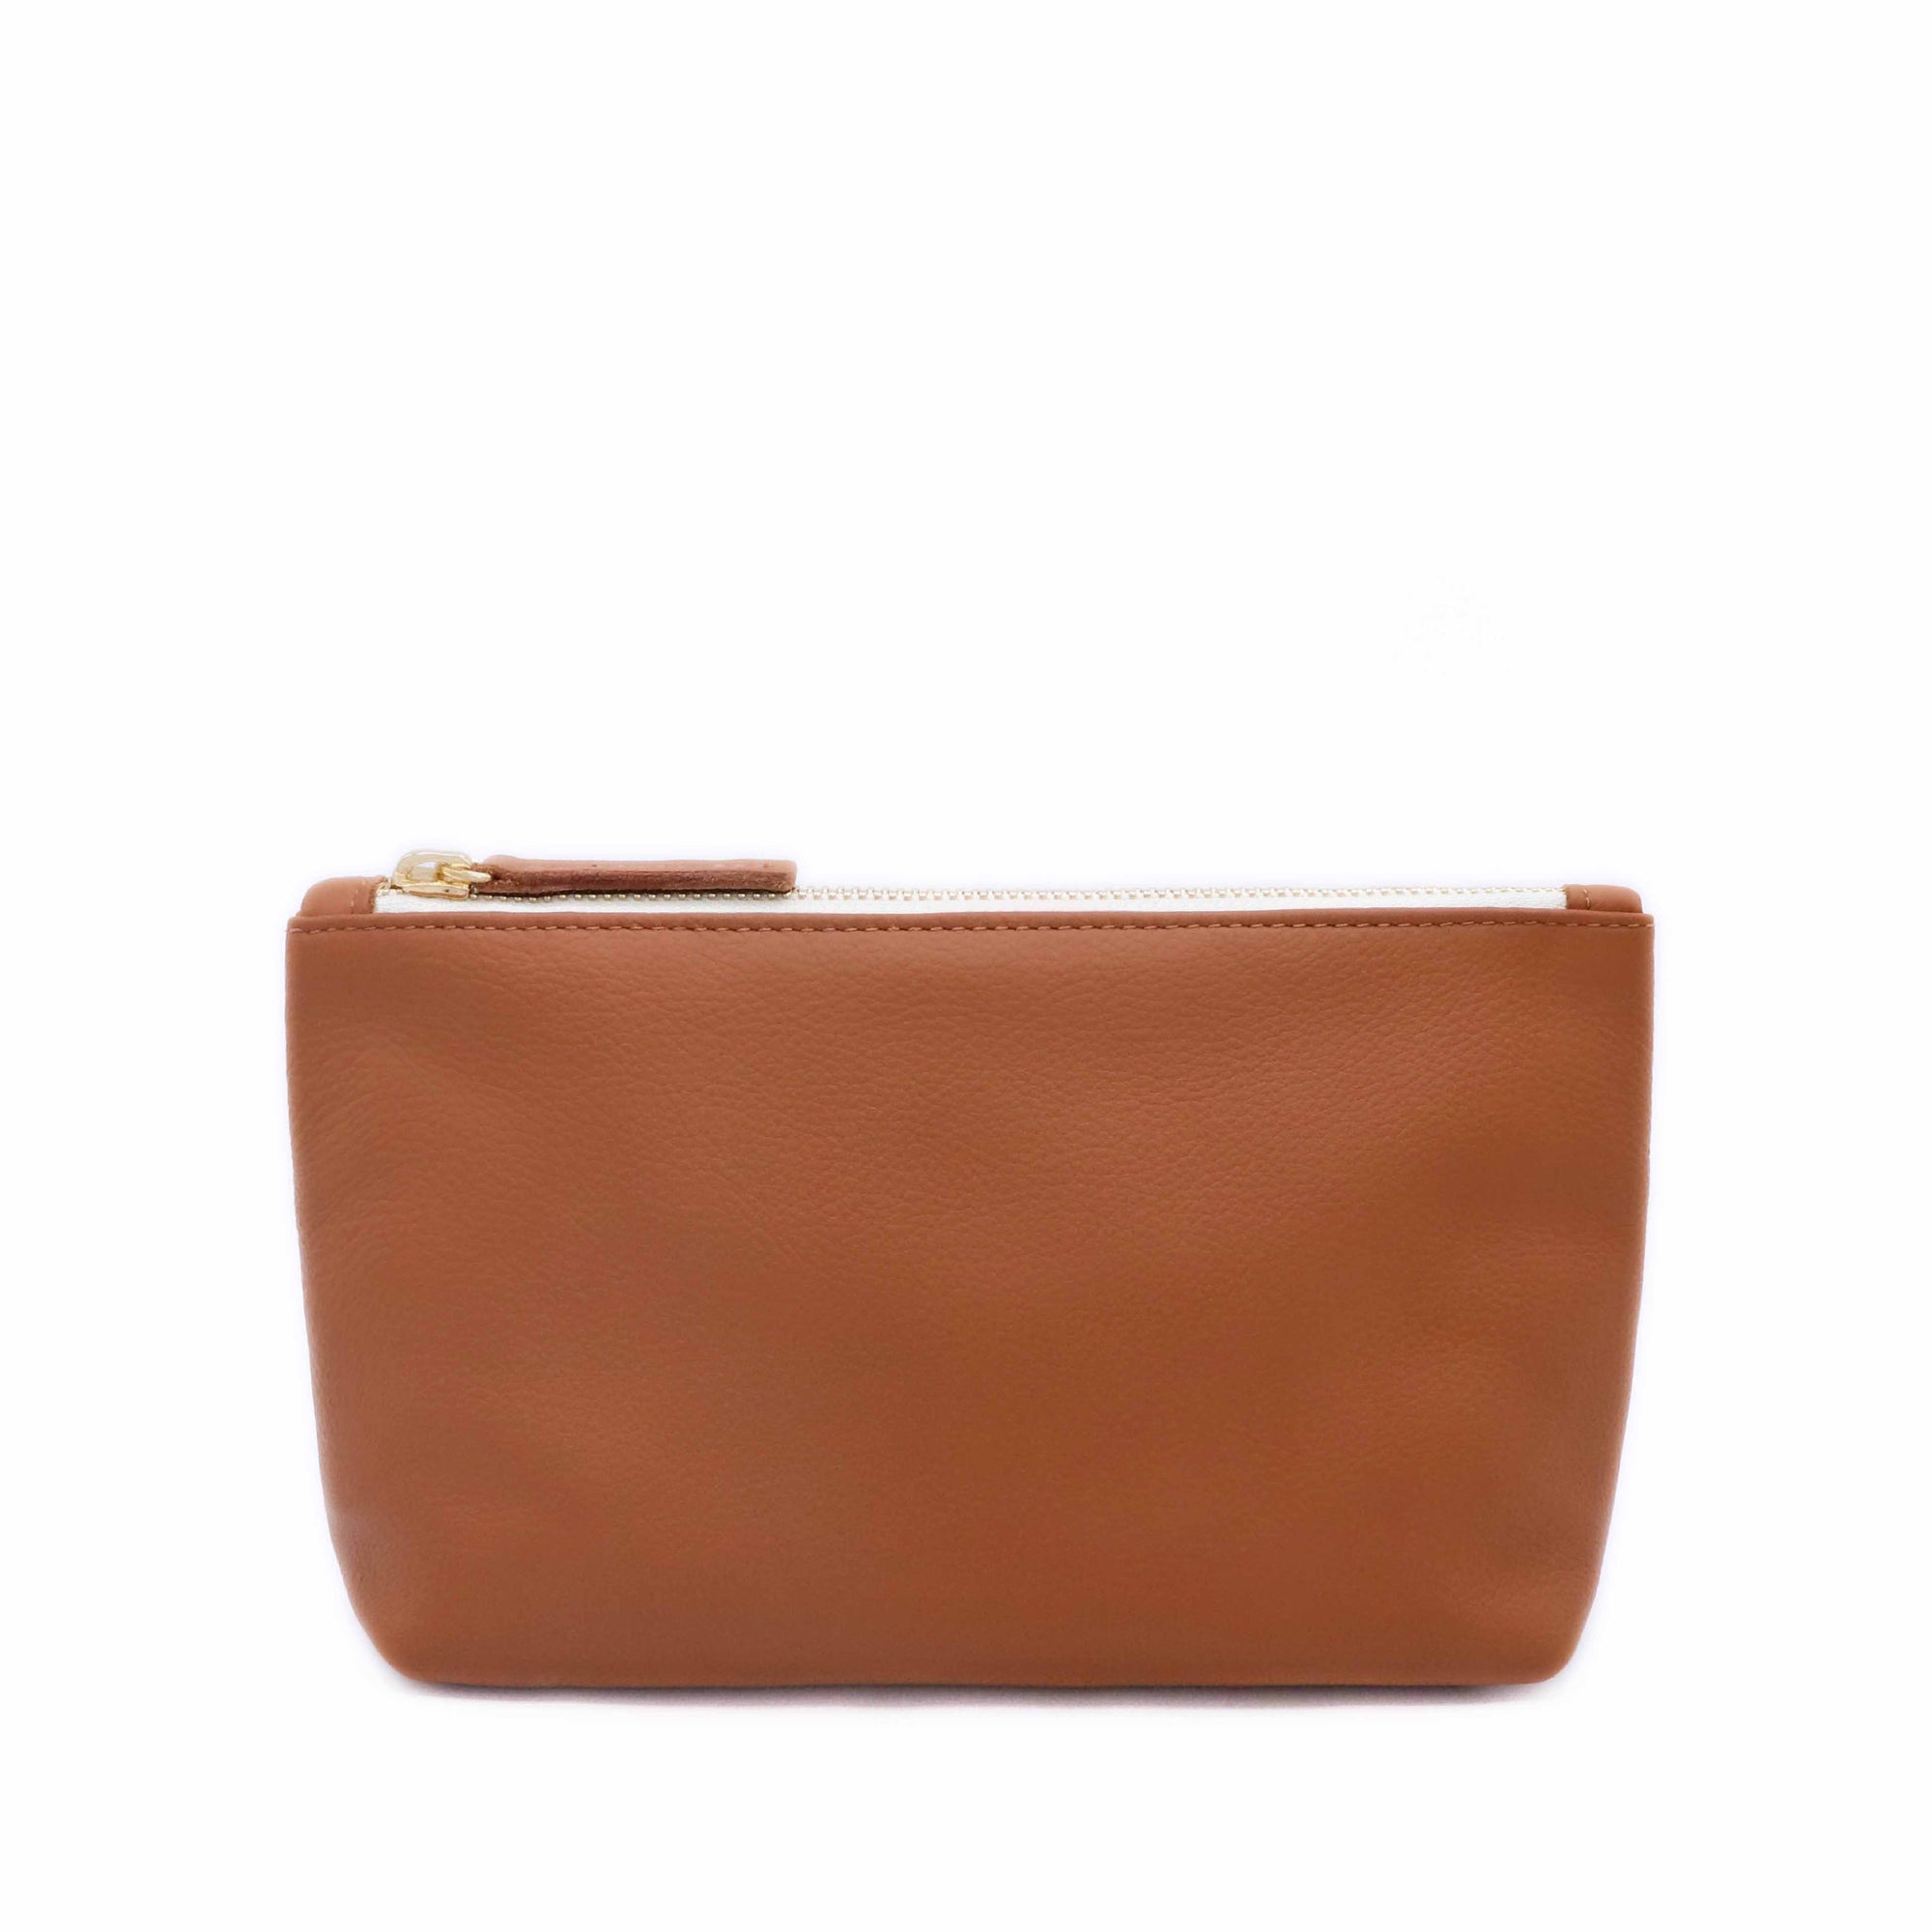 Napa Pouch - Leather zipper bag in Cream leather. Made in U.S.A. by Jana Kay.  Edit alt text